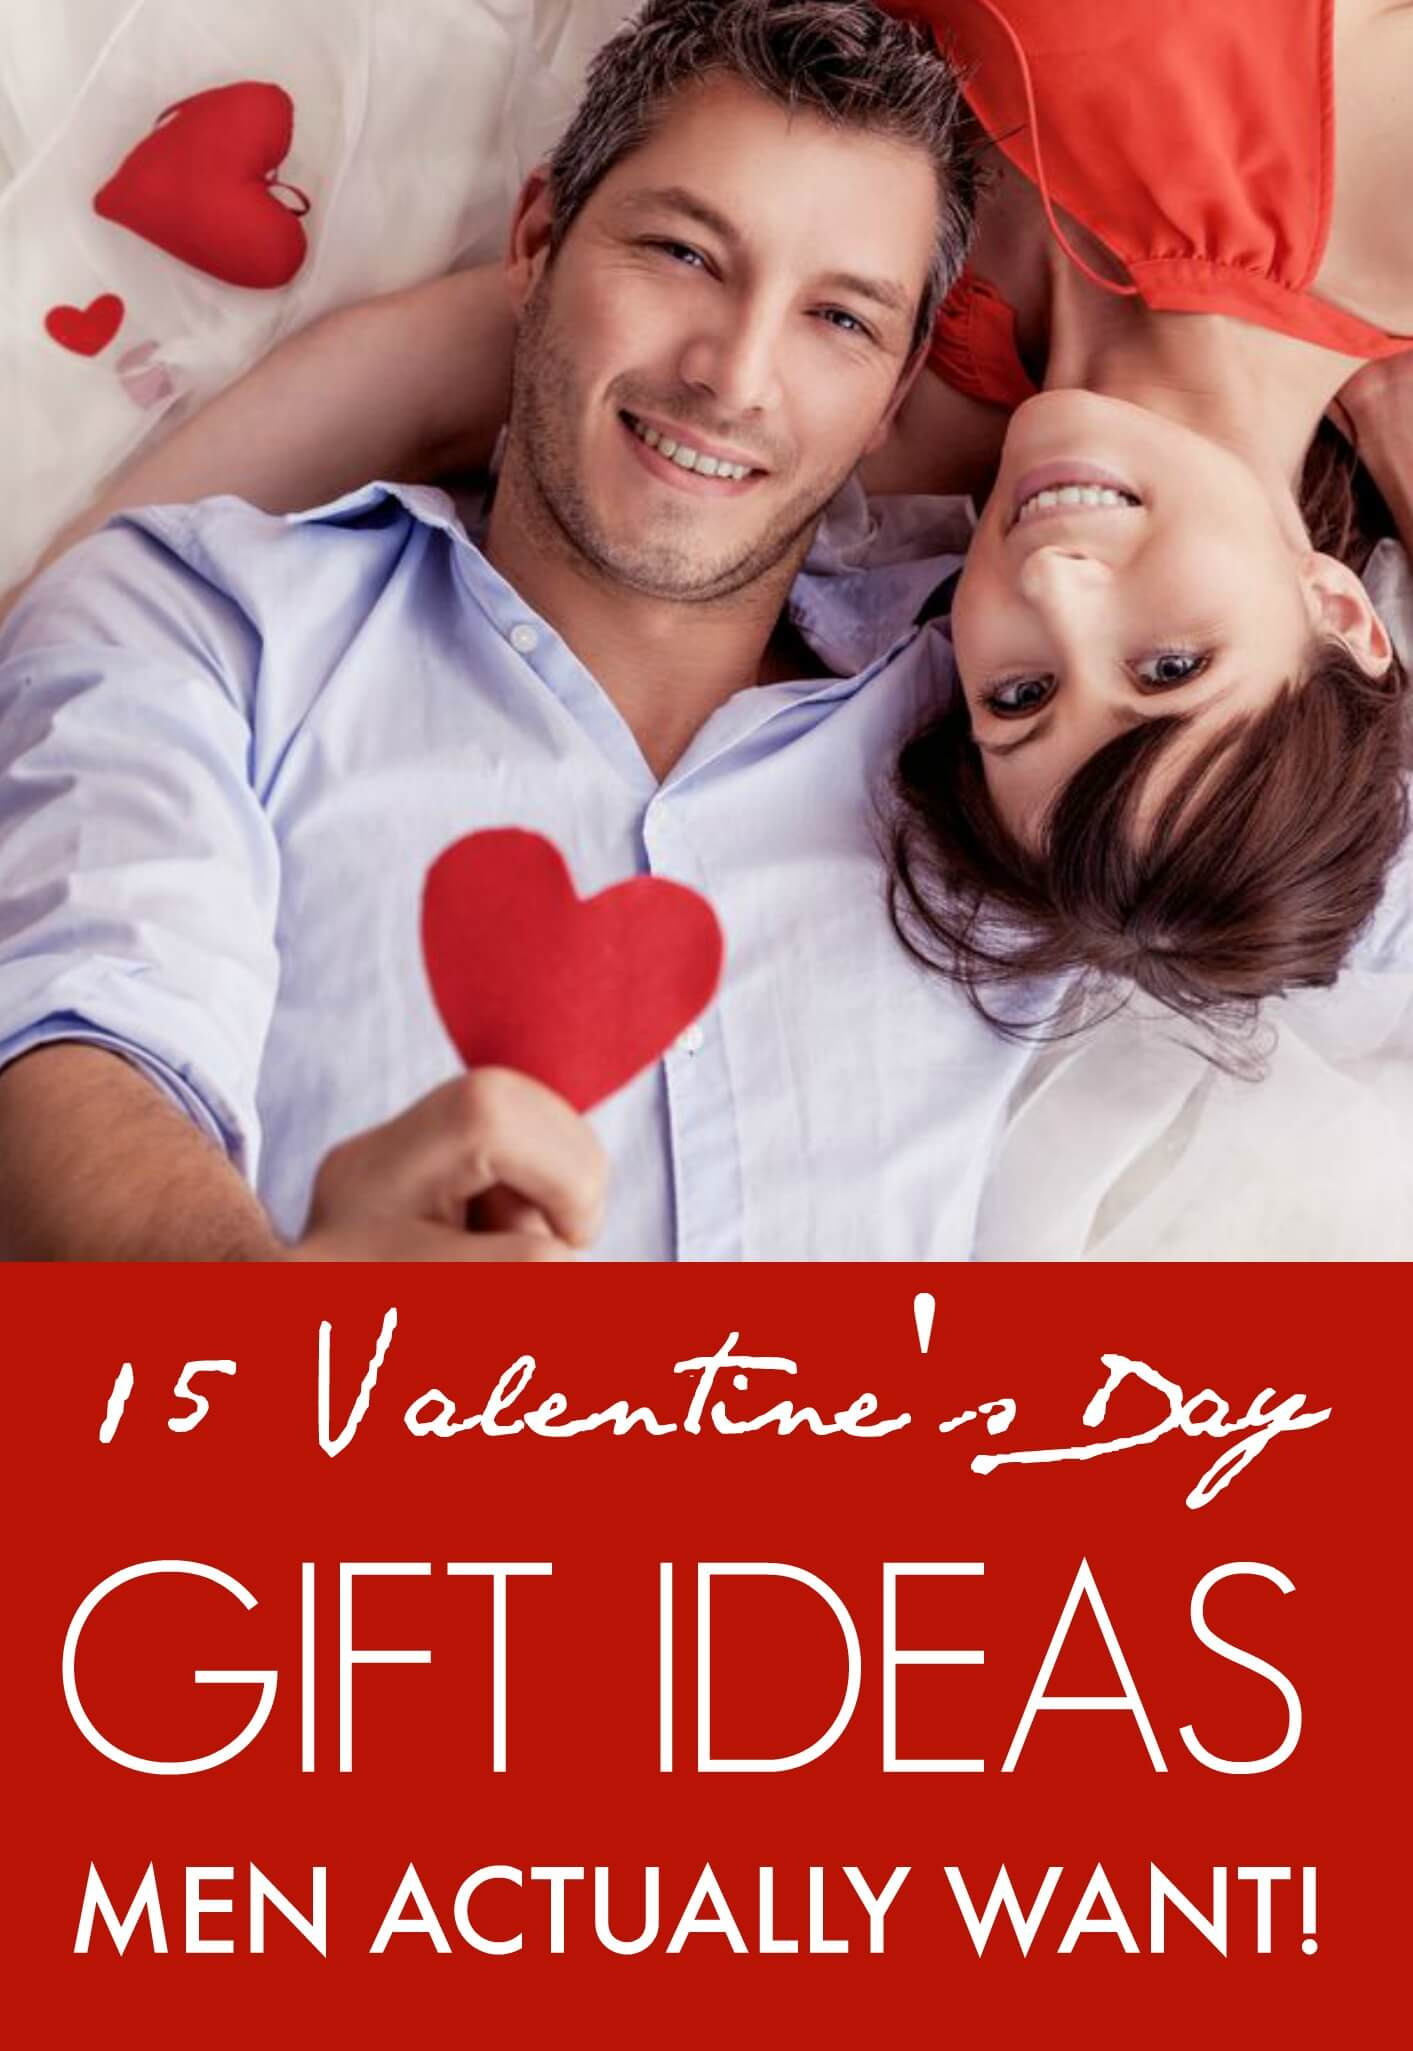 Valentines Day Gift For Men
 15 Valentine’s Day Gift ideas Men Actually Want